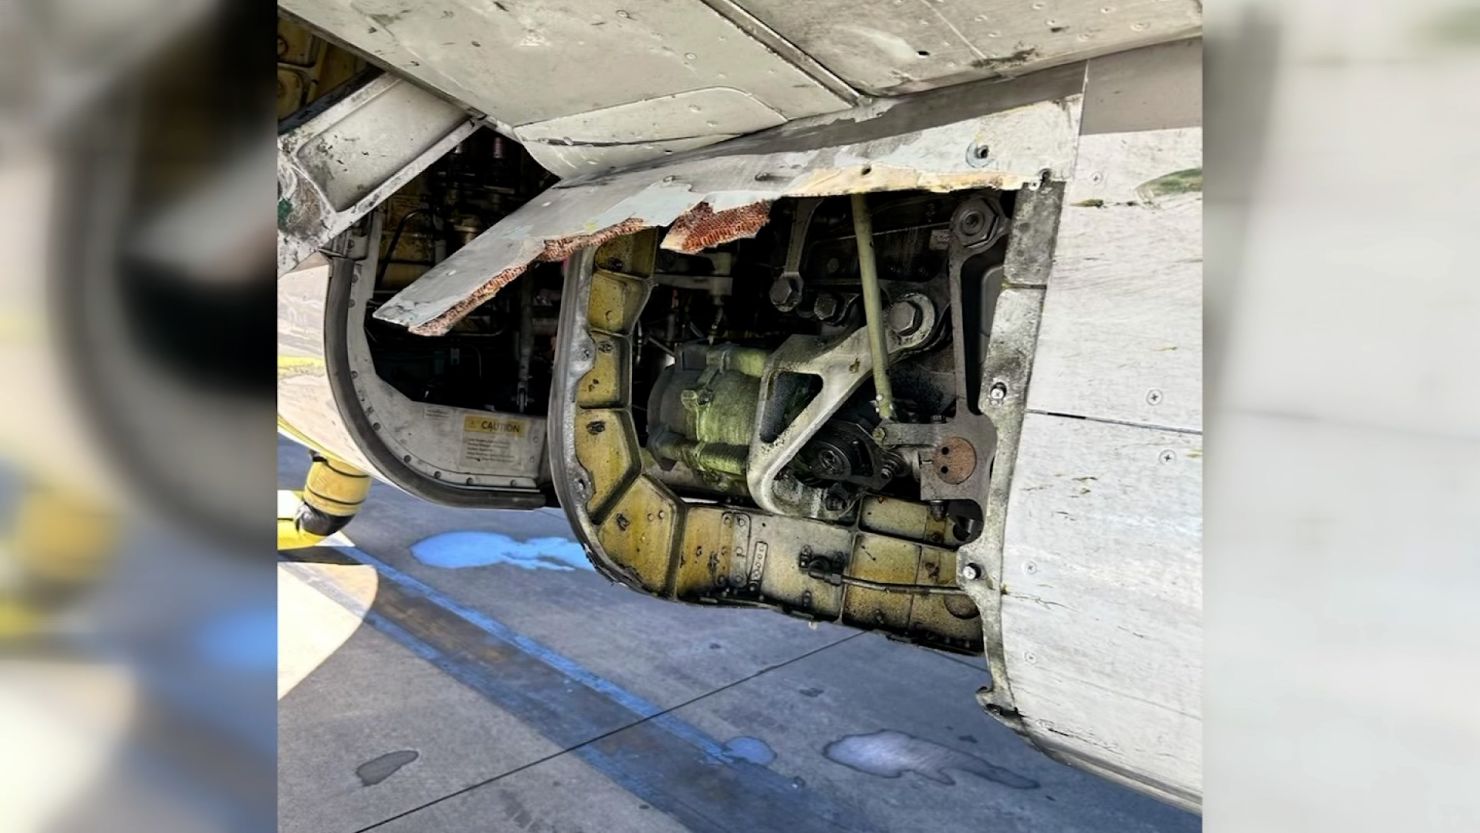 The United Airlines plane had a missing panel on the bottom side of the fuselage, underneath the wing and behind the main landing gear, according to the airline.